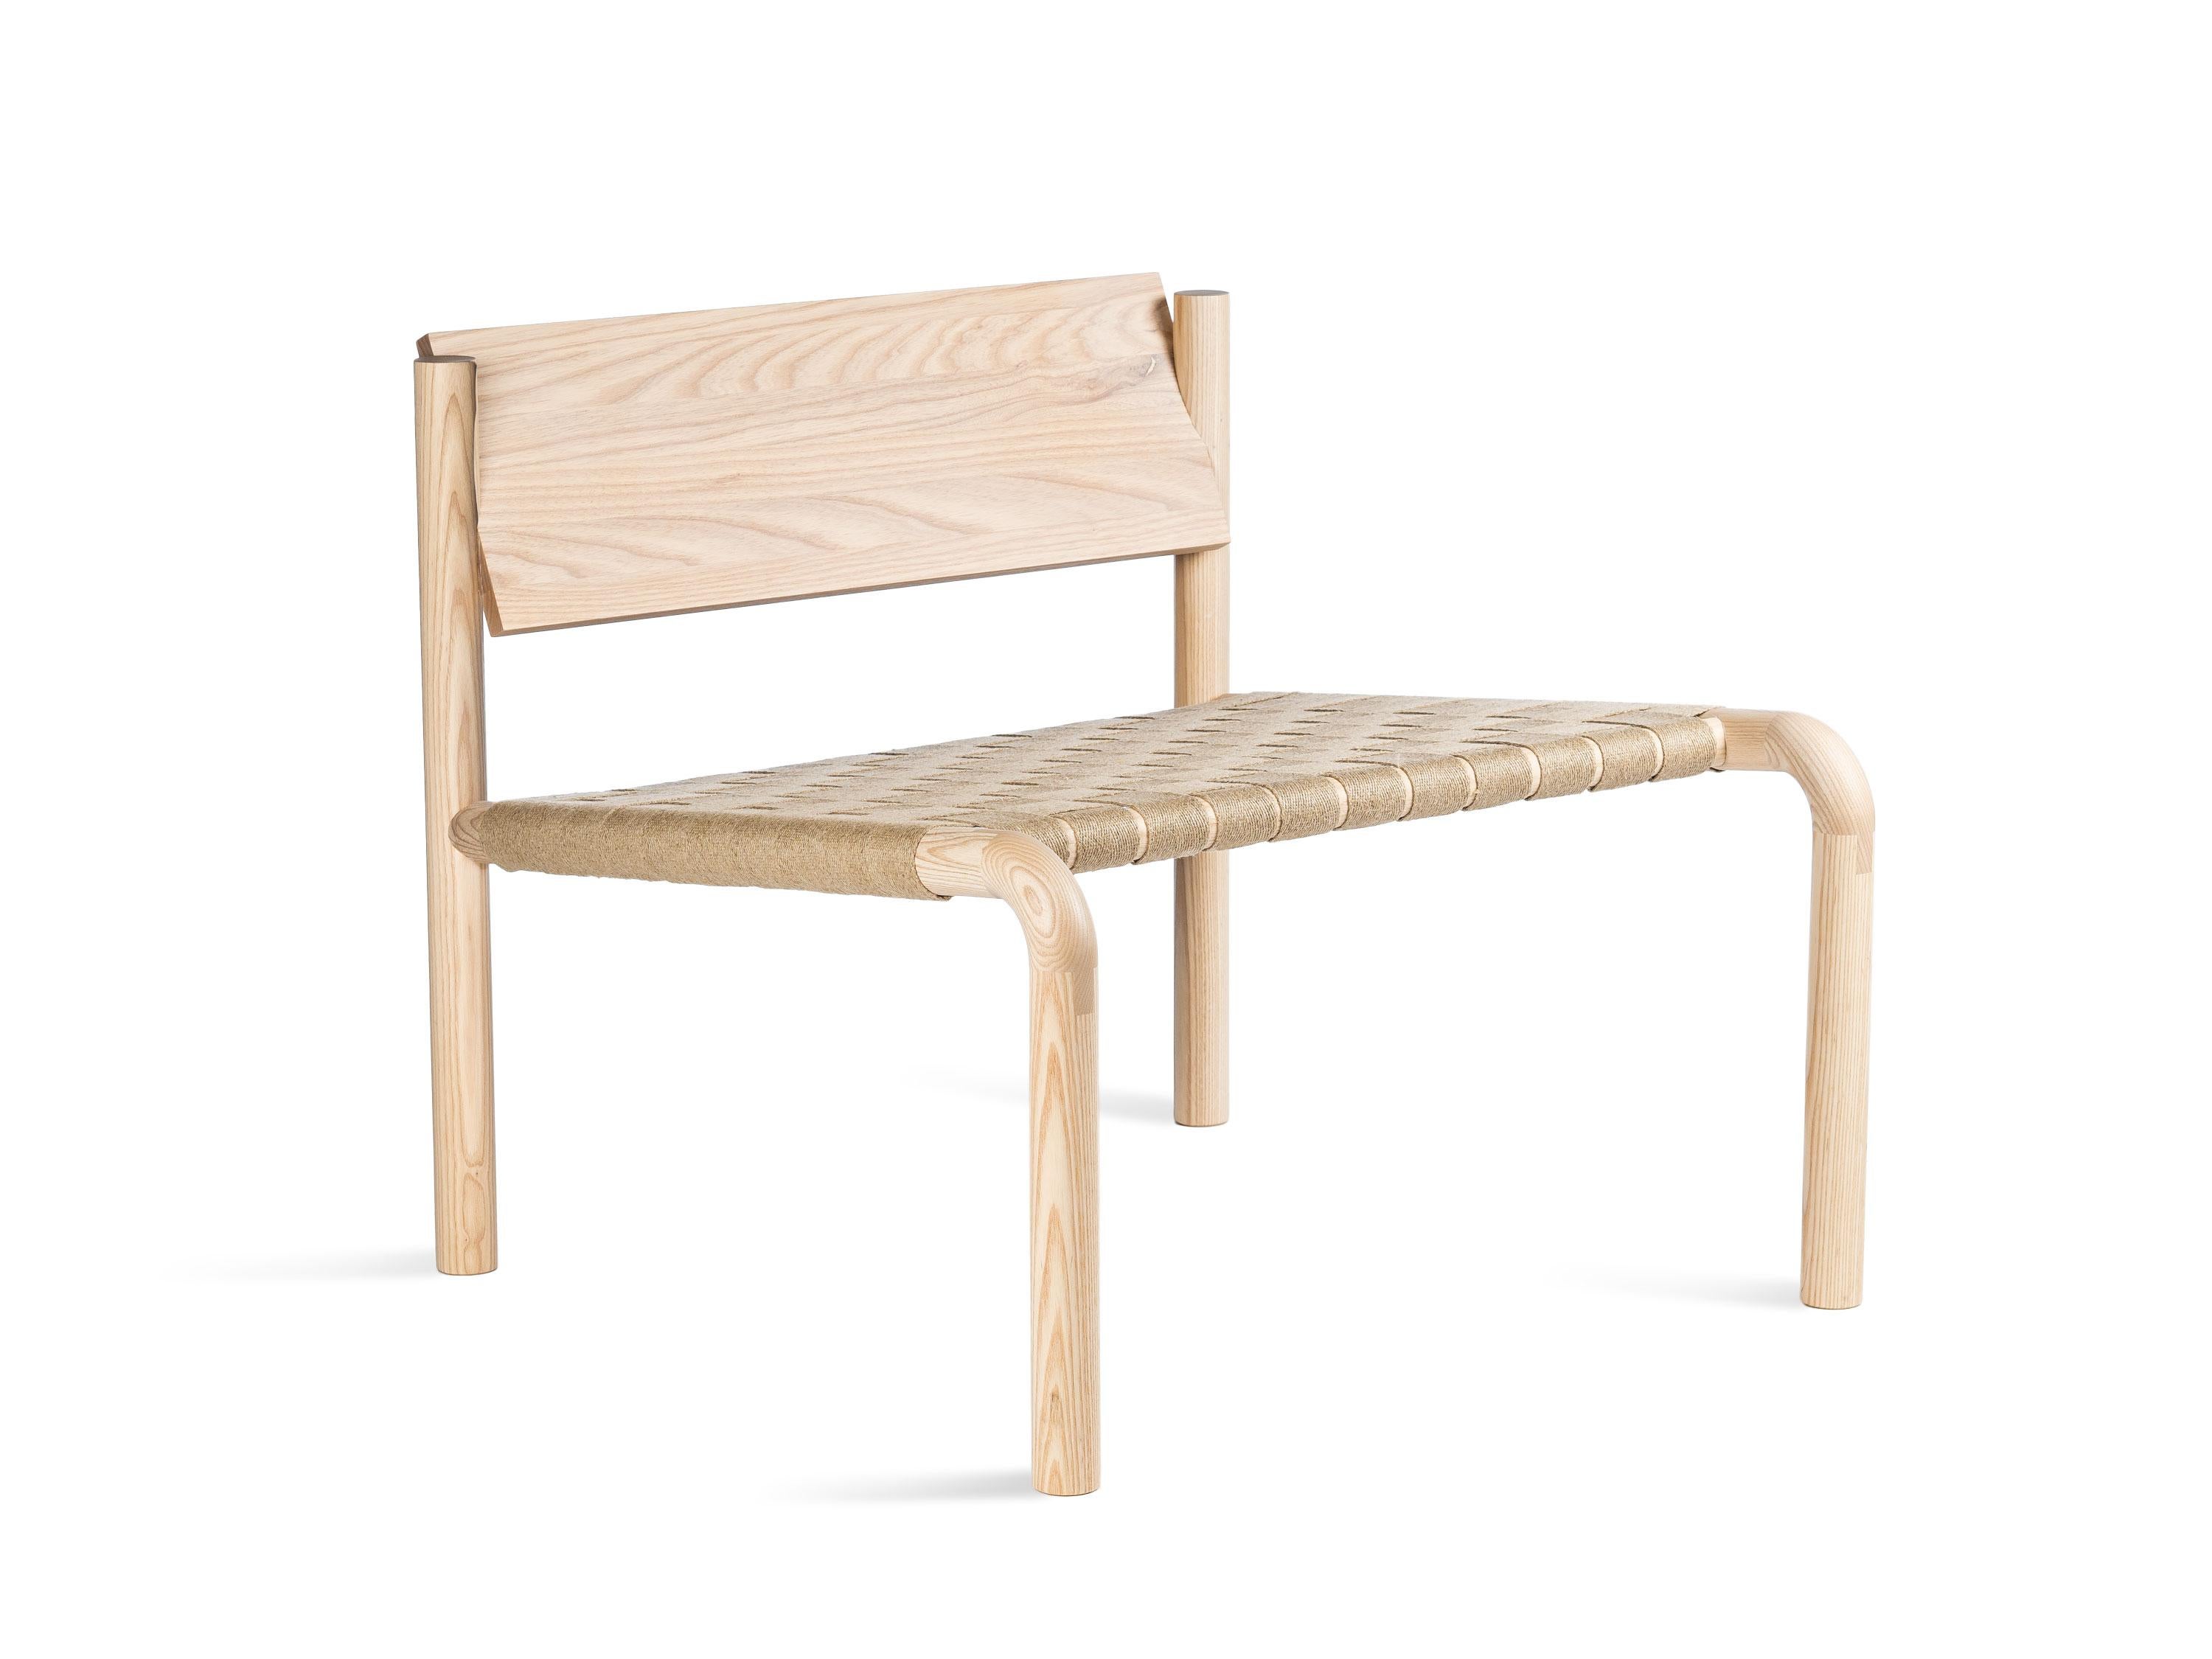 Kaski lounge, wide by made by choice with Joanna Laajisto
Dimensions: 77 x 74 x 76 cm
Materials: birch plywood
Standard finishes: natural wood / painted black

Also available: kaski lounge- narrow.

The Kaski chair follows Finnish 19th